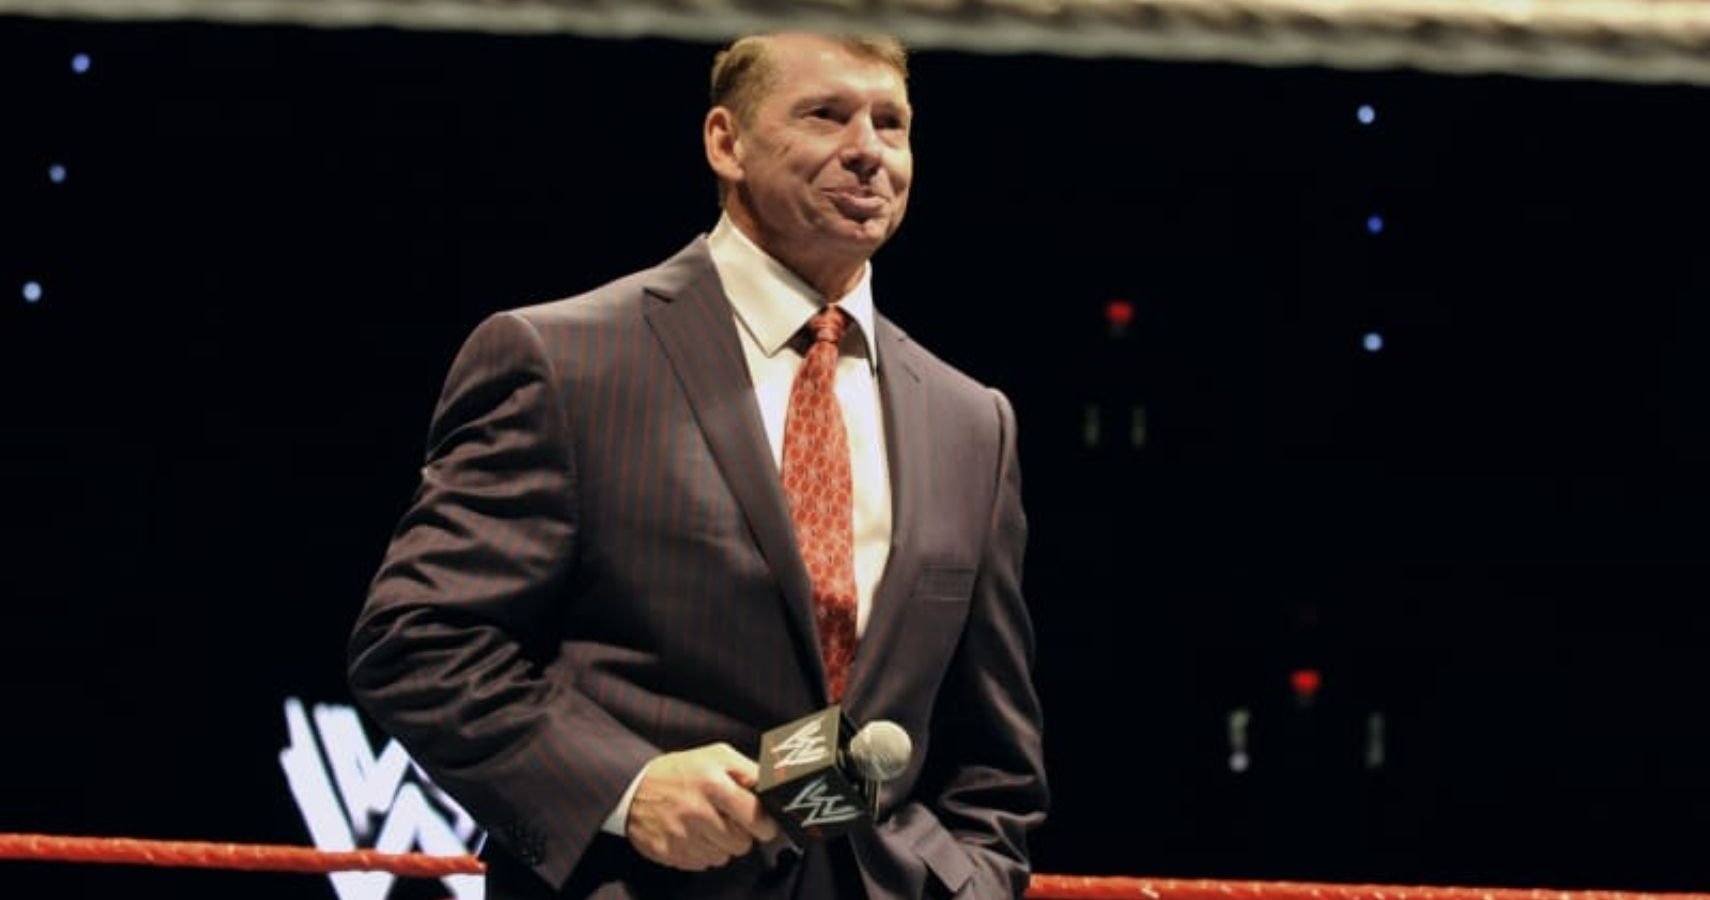 Vince McMahon Simply "Had Nothing" For Released Superstars, According To WWE Insider